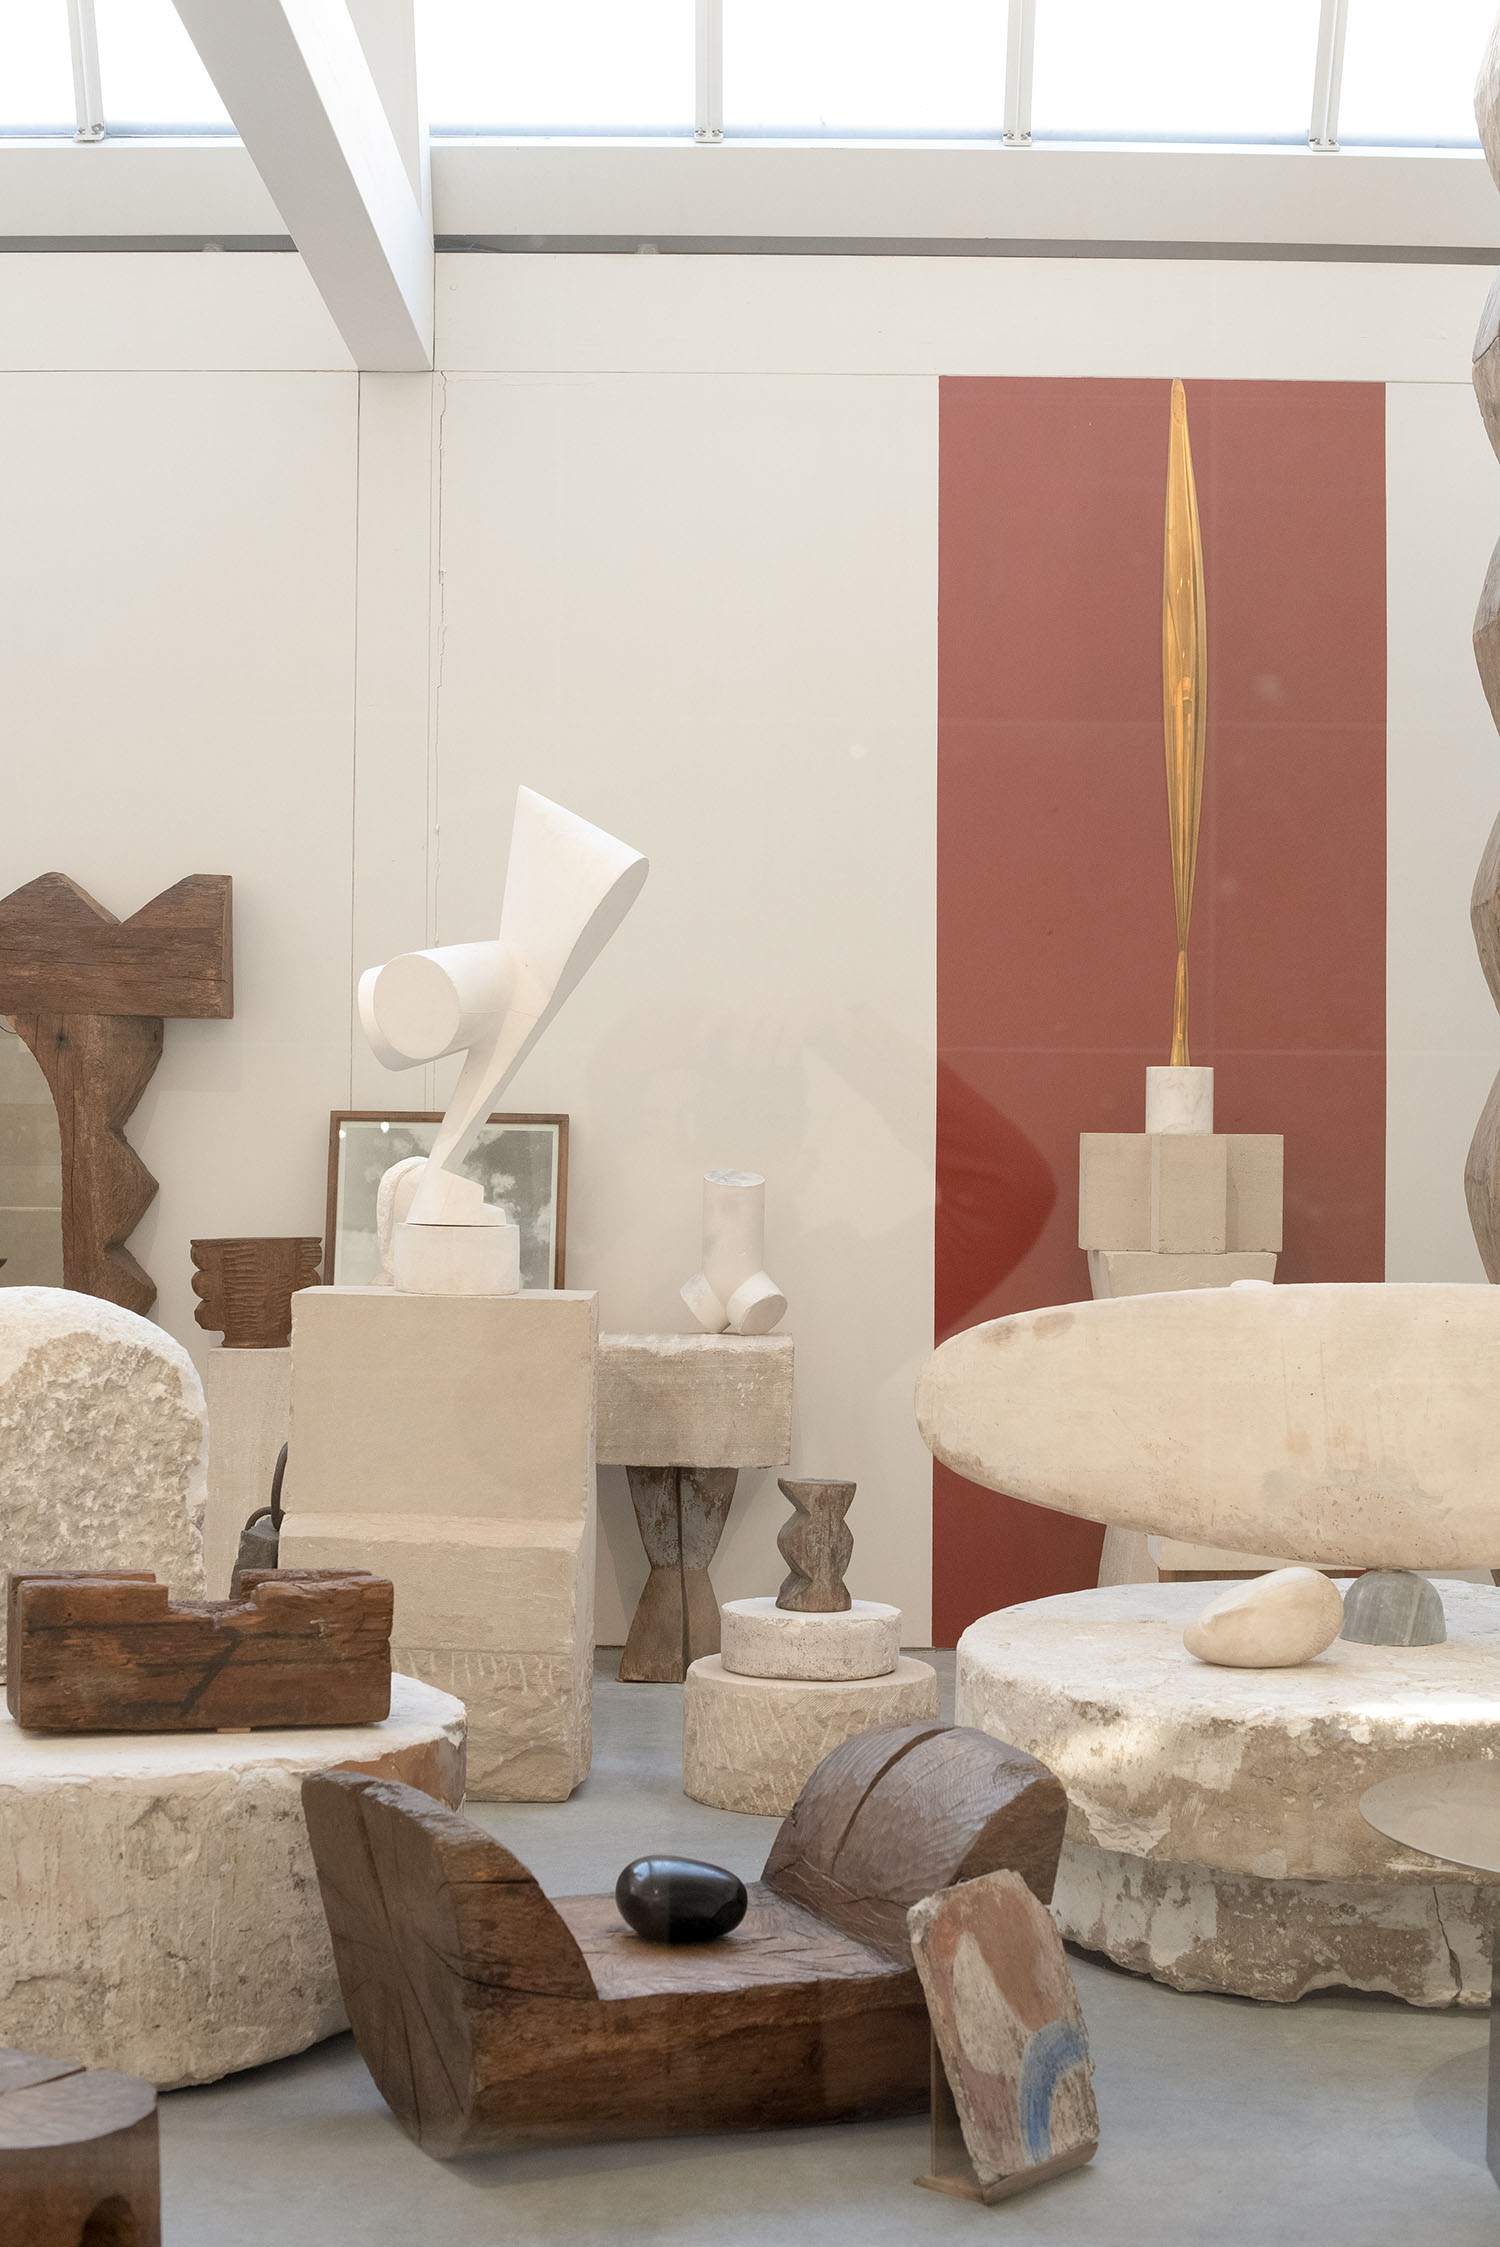 Sculptures and red painting at Atelier Brancusi in Centre Pompidou